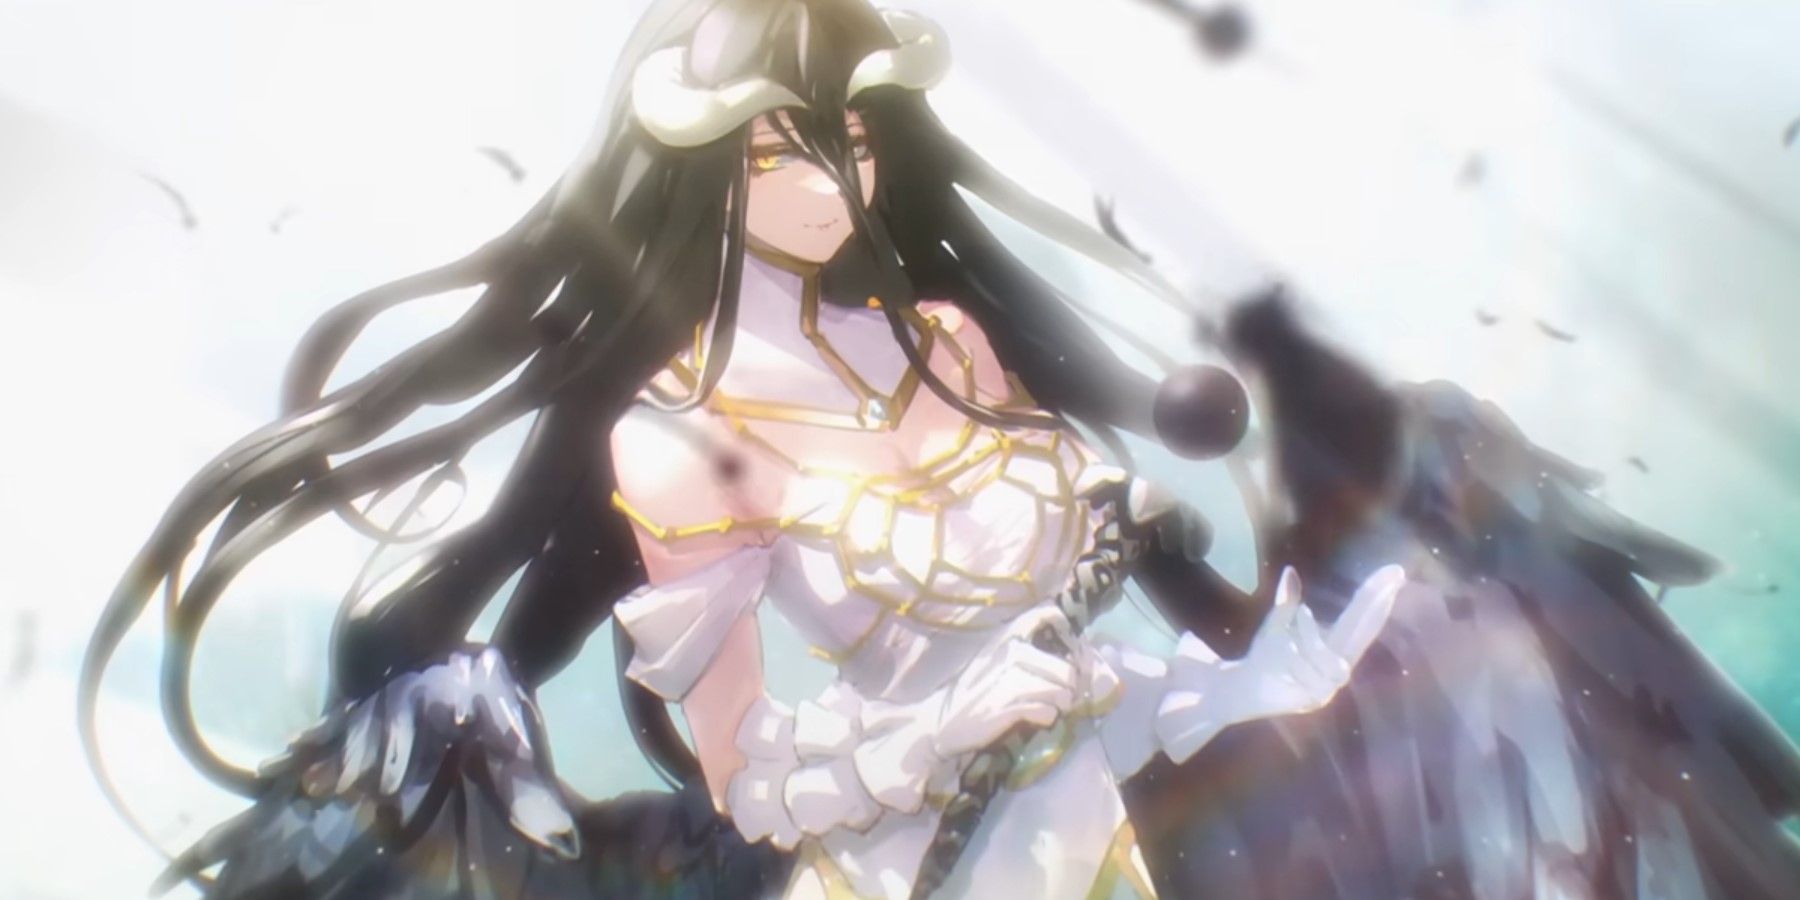 Overlord IV featuring Albedo